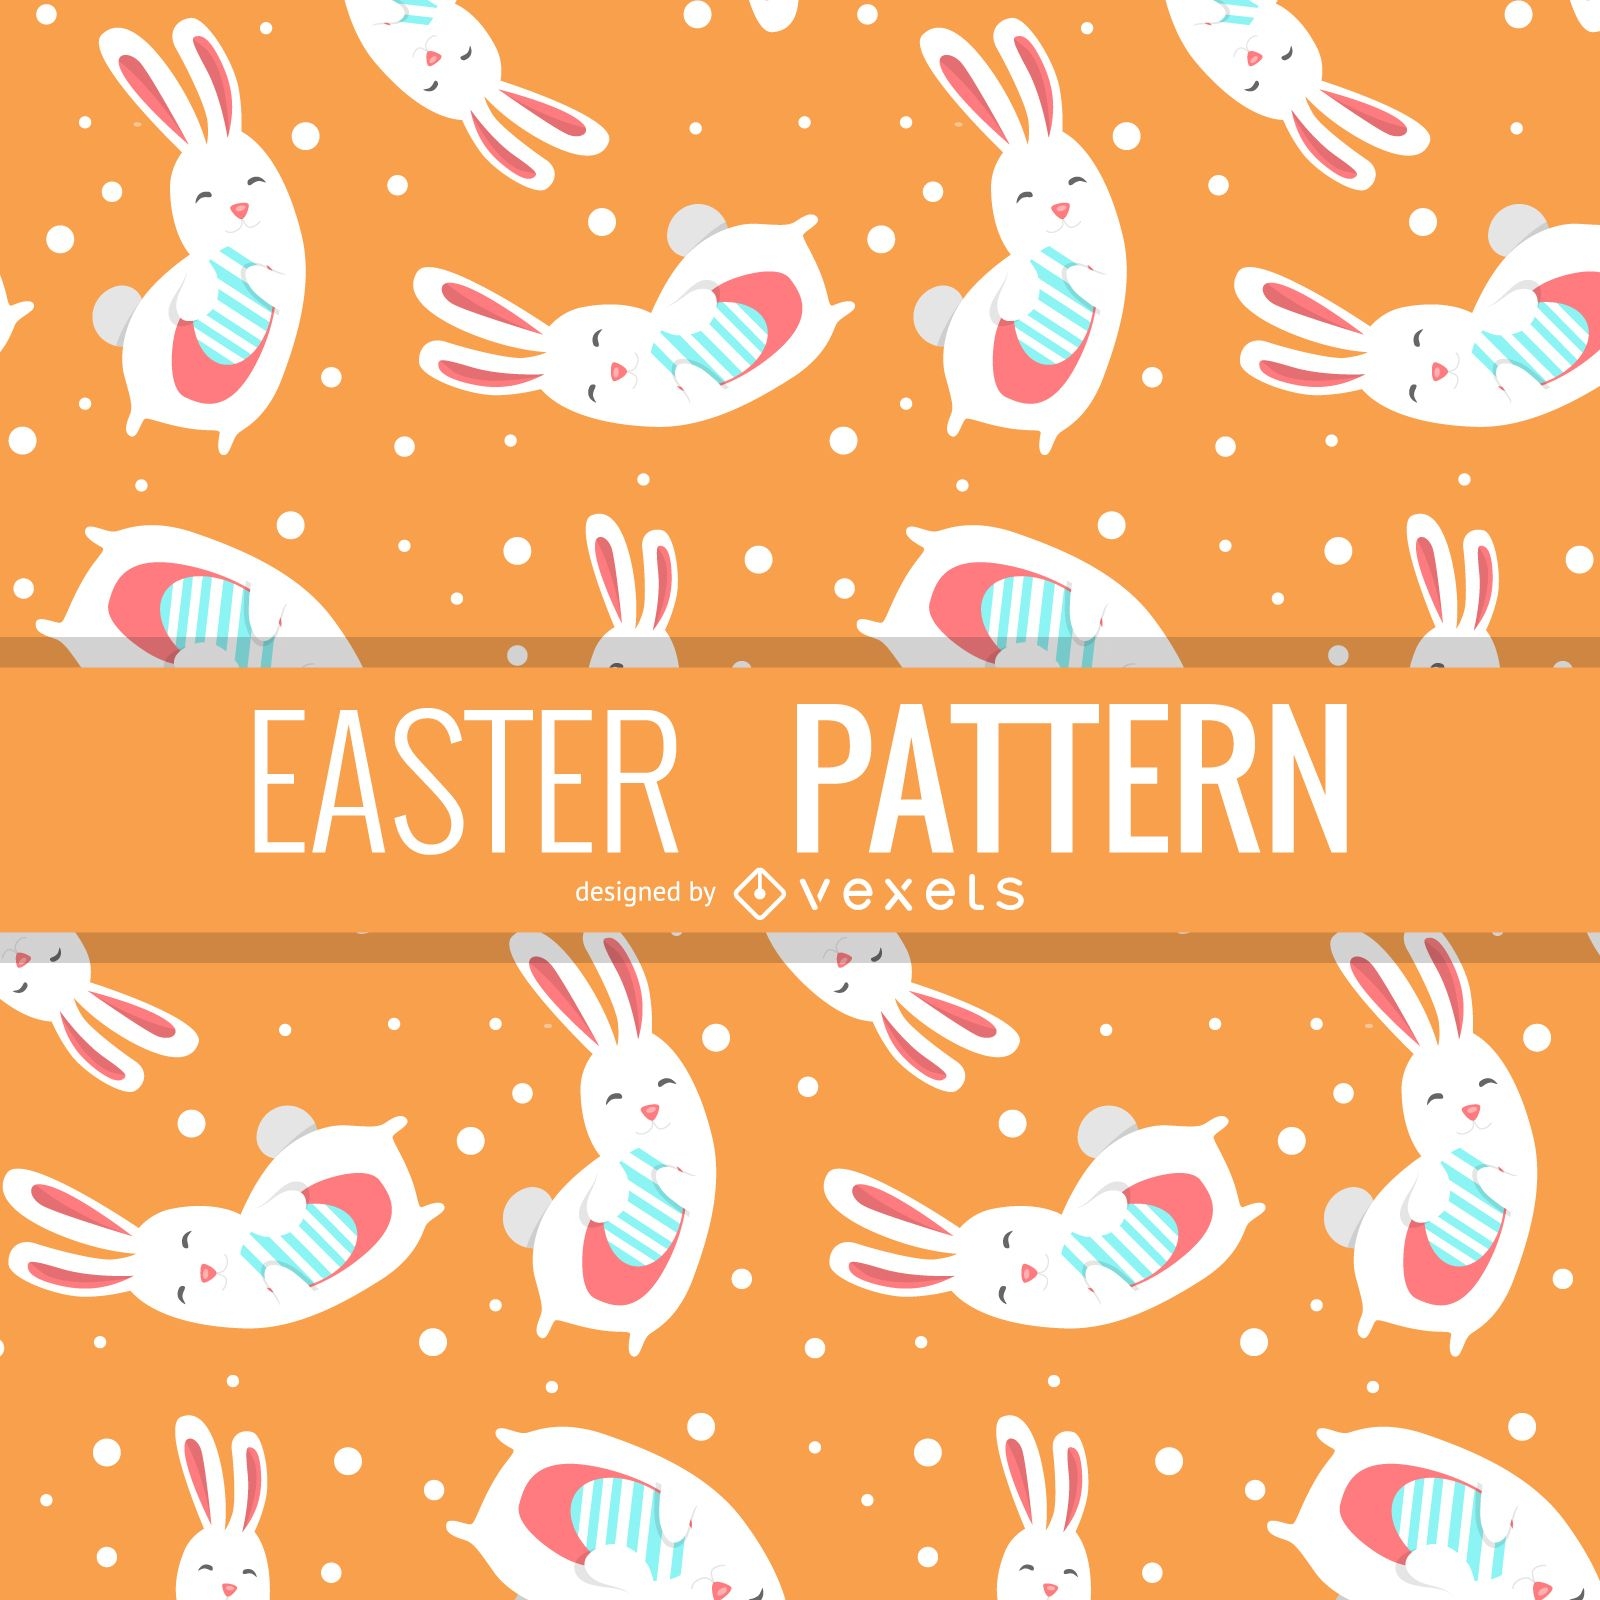 Easter pattern with illustrated bunnies